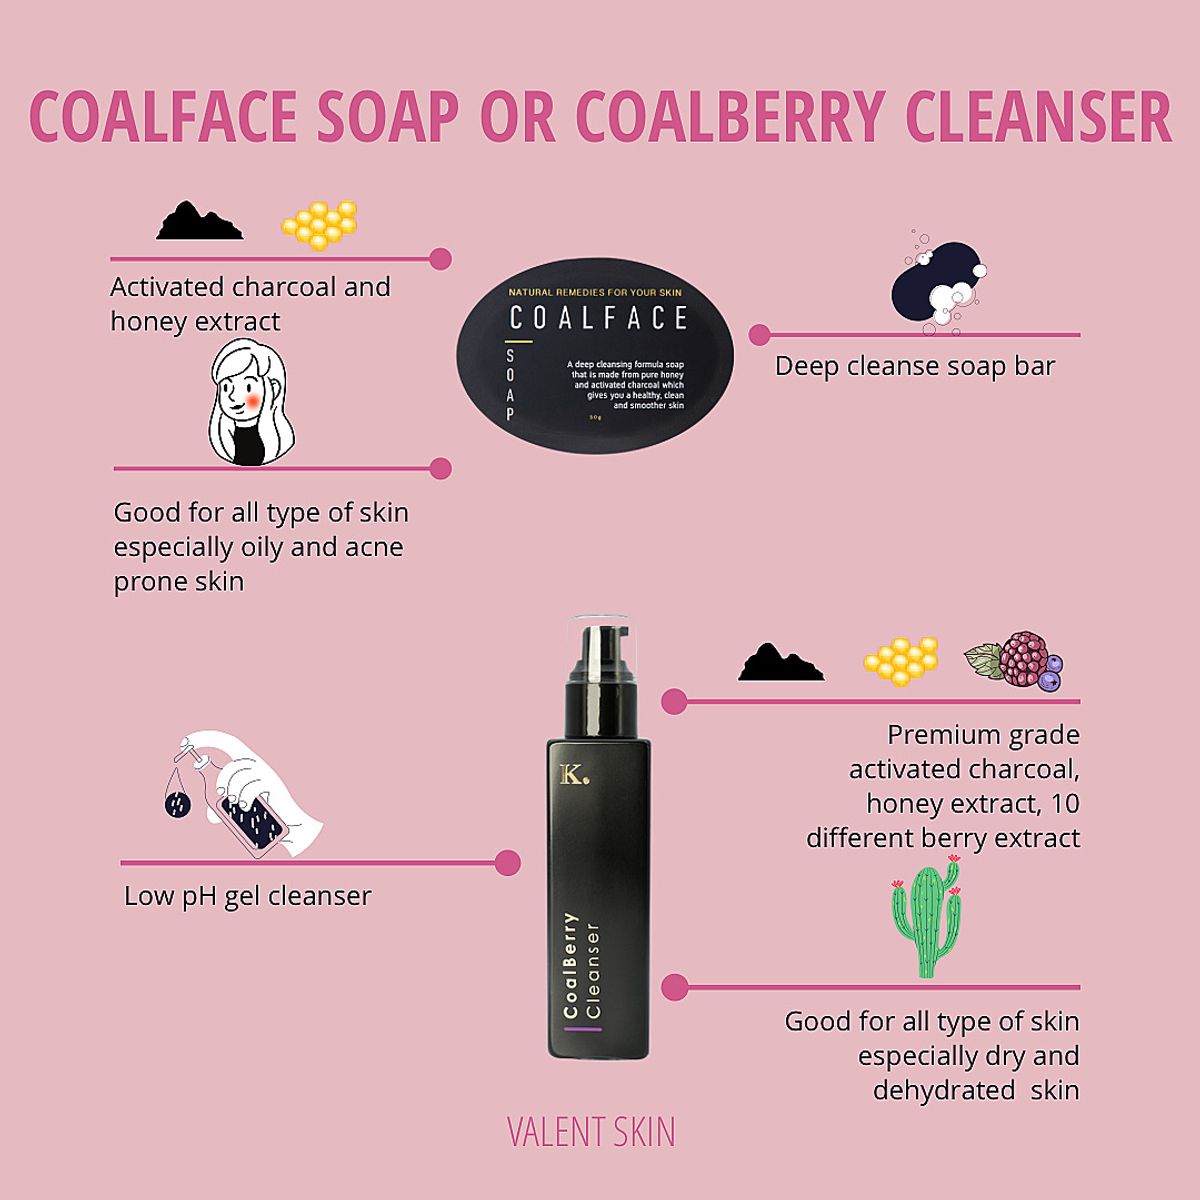 CoalFace Soap or CoalBerry Cleanser?